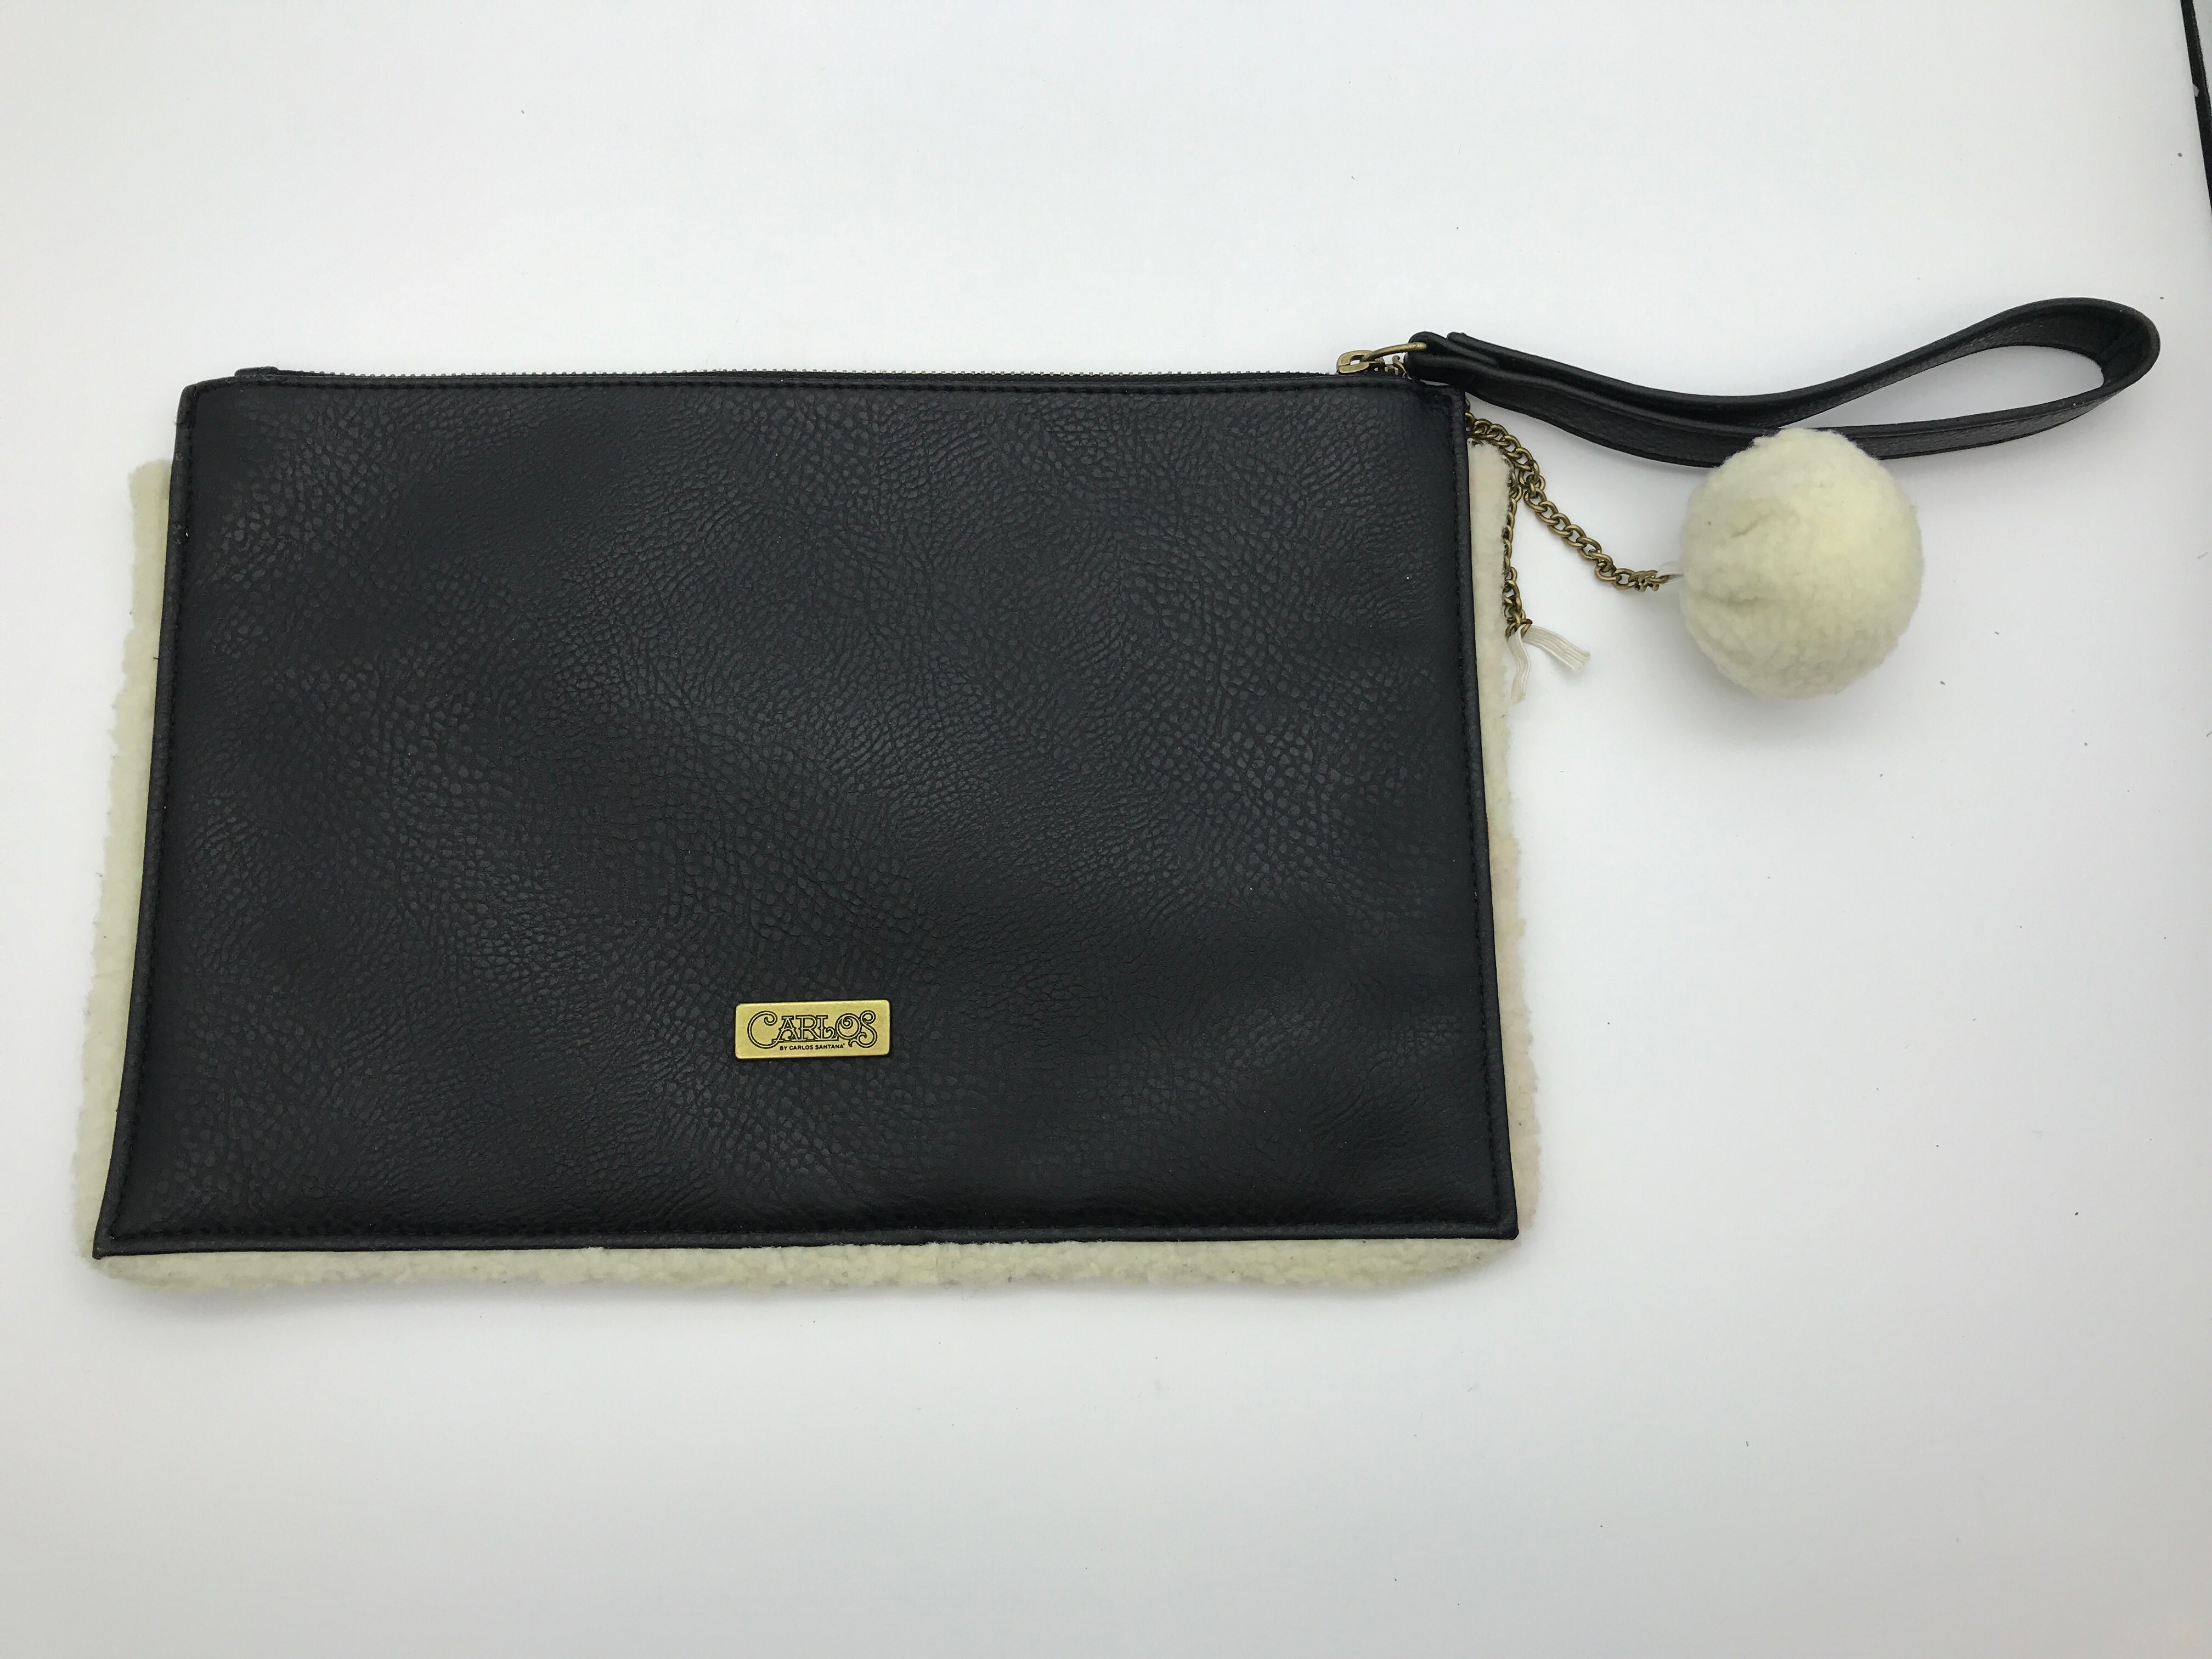 Carlos by Carlos Santana Black Faux Leather and Sherpa Zip-Up Wristlet